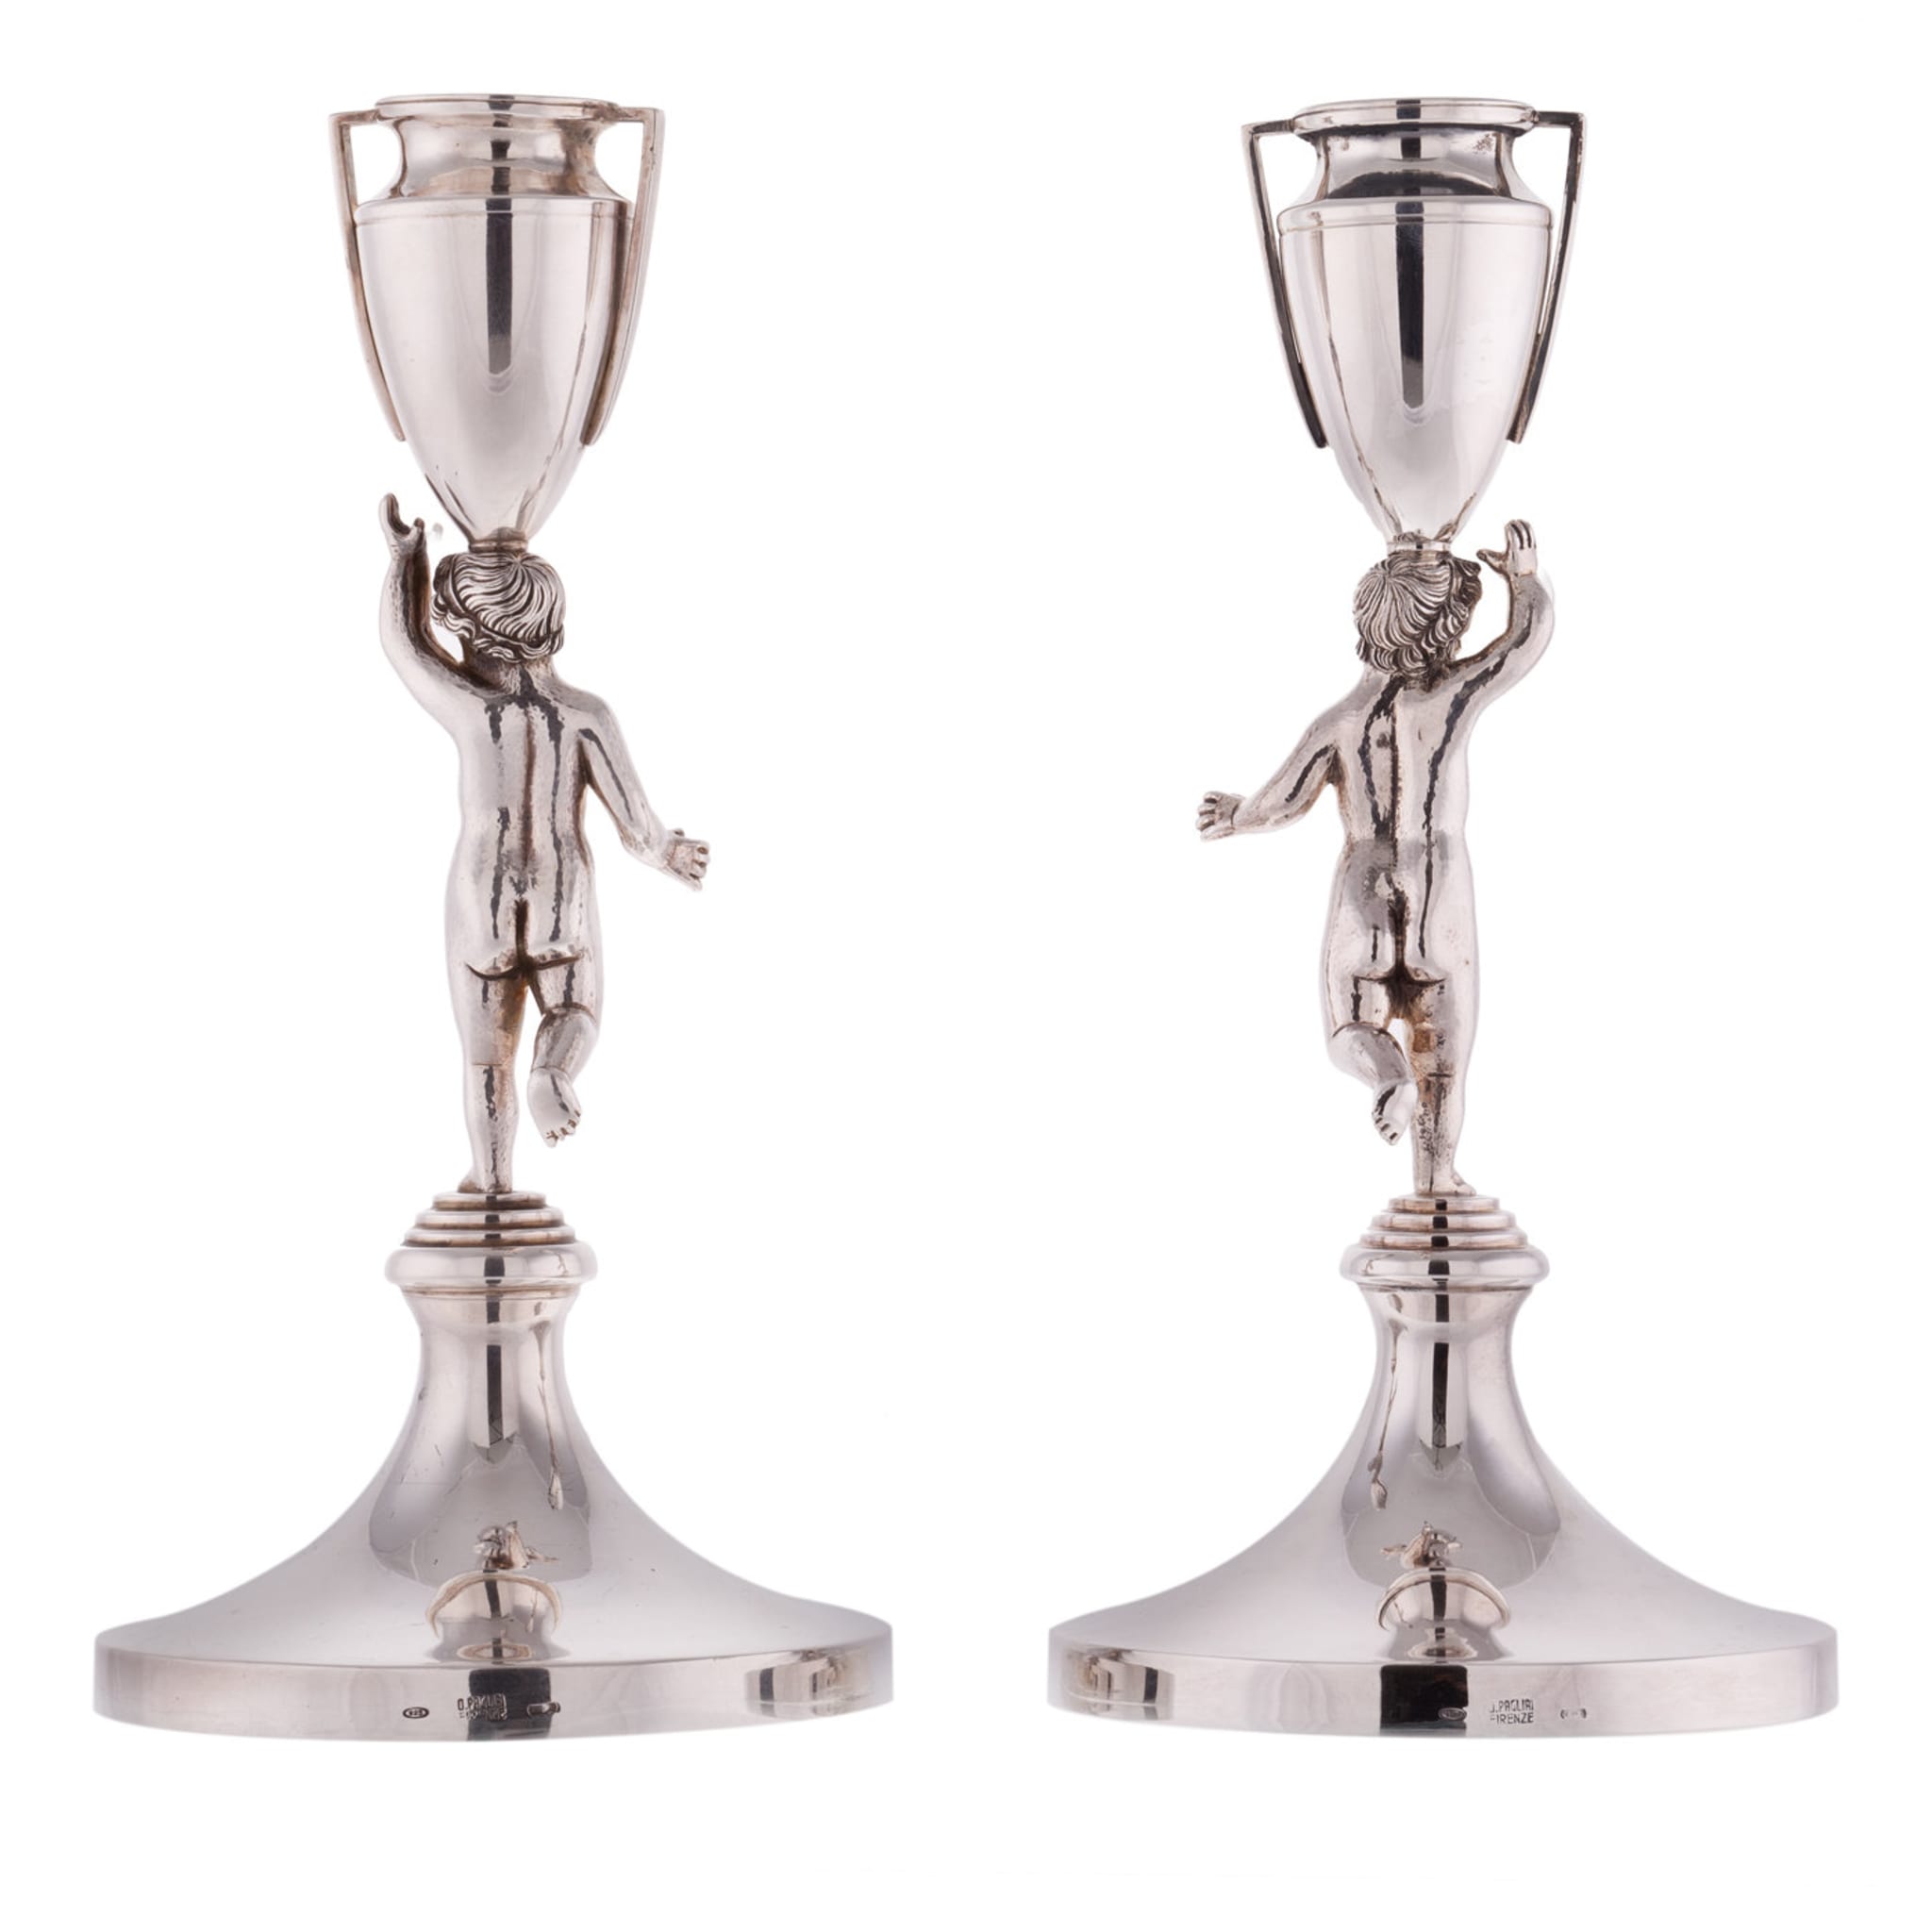 Pair of Pitti Sterling Silver Candlesticks - Alternative view 1